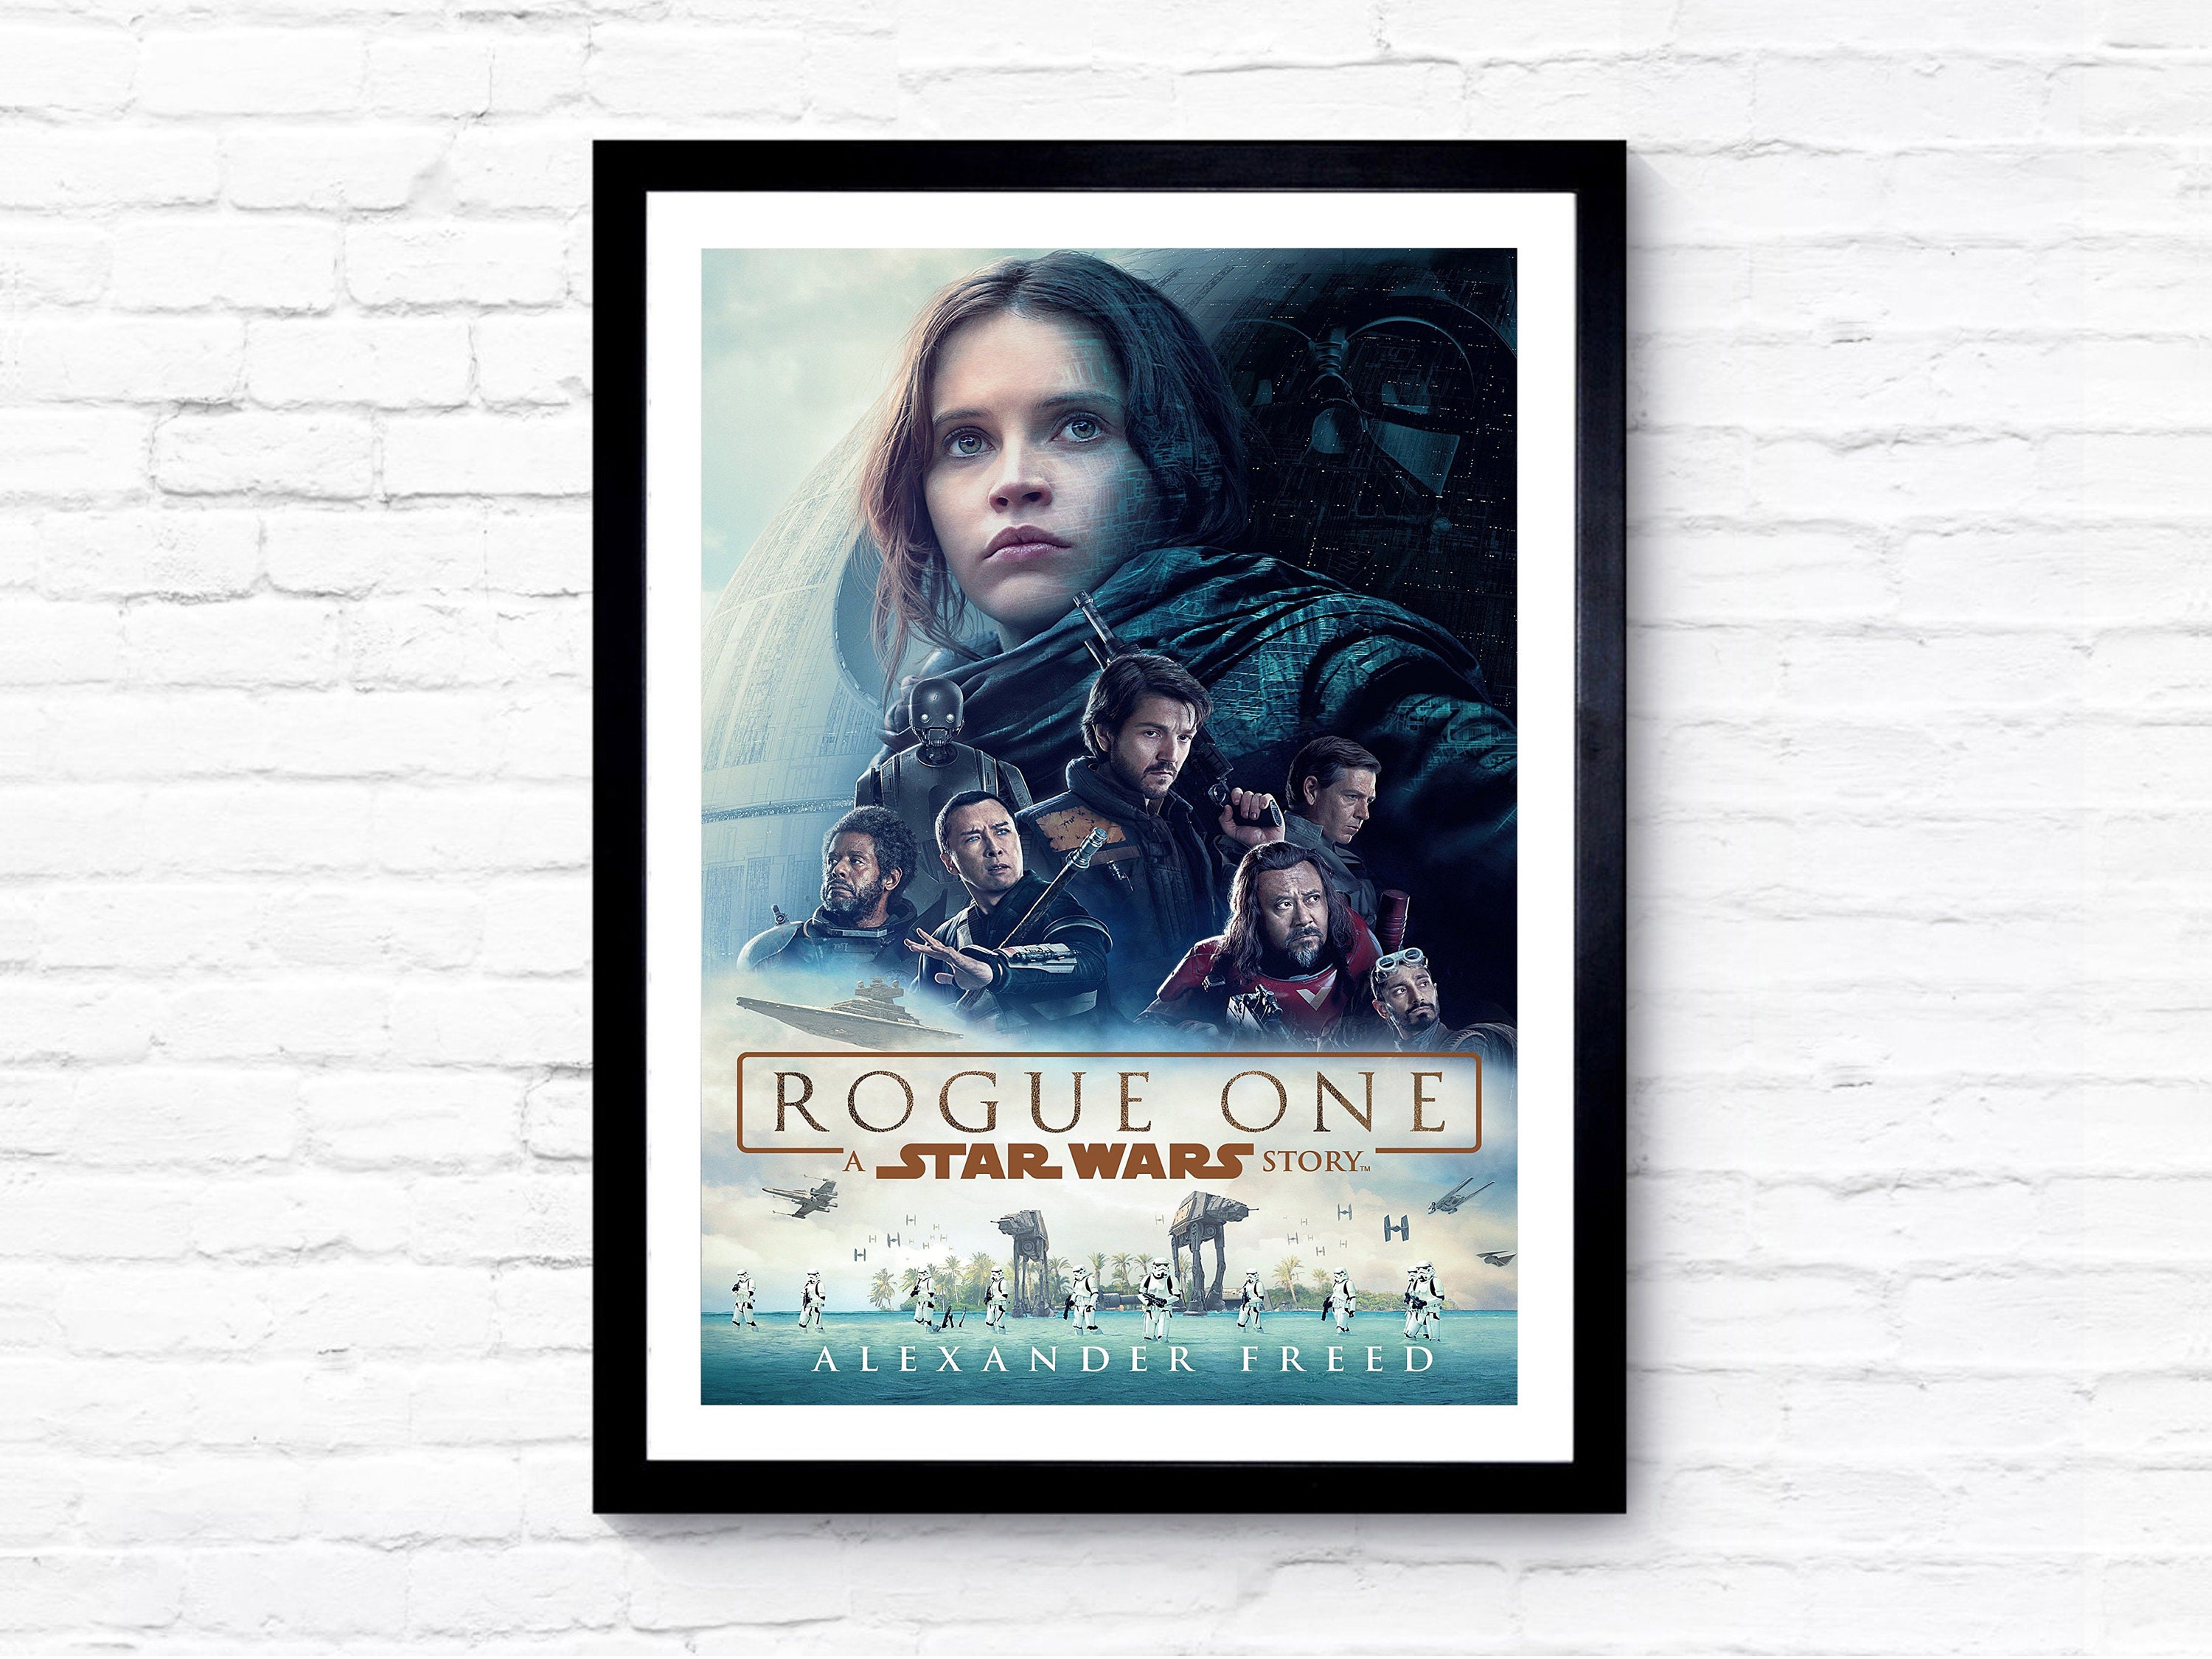 Rogue One A Star Wars Story - 2016 - Movie Poster  Film Poster  Movie Poster Art - A1  A2  A3  A4  A5